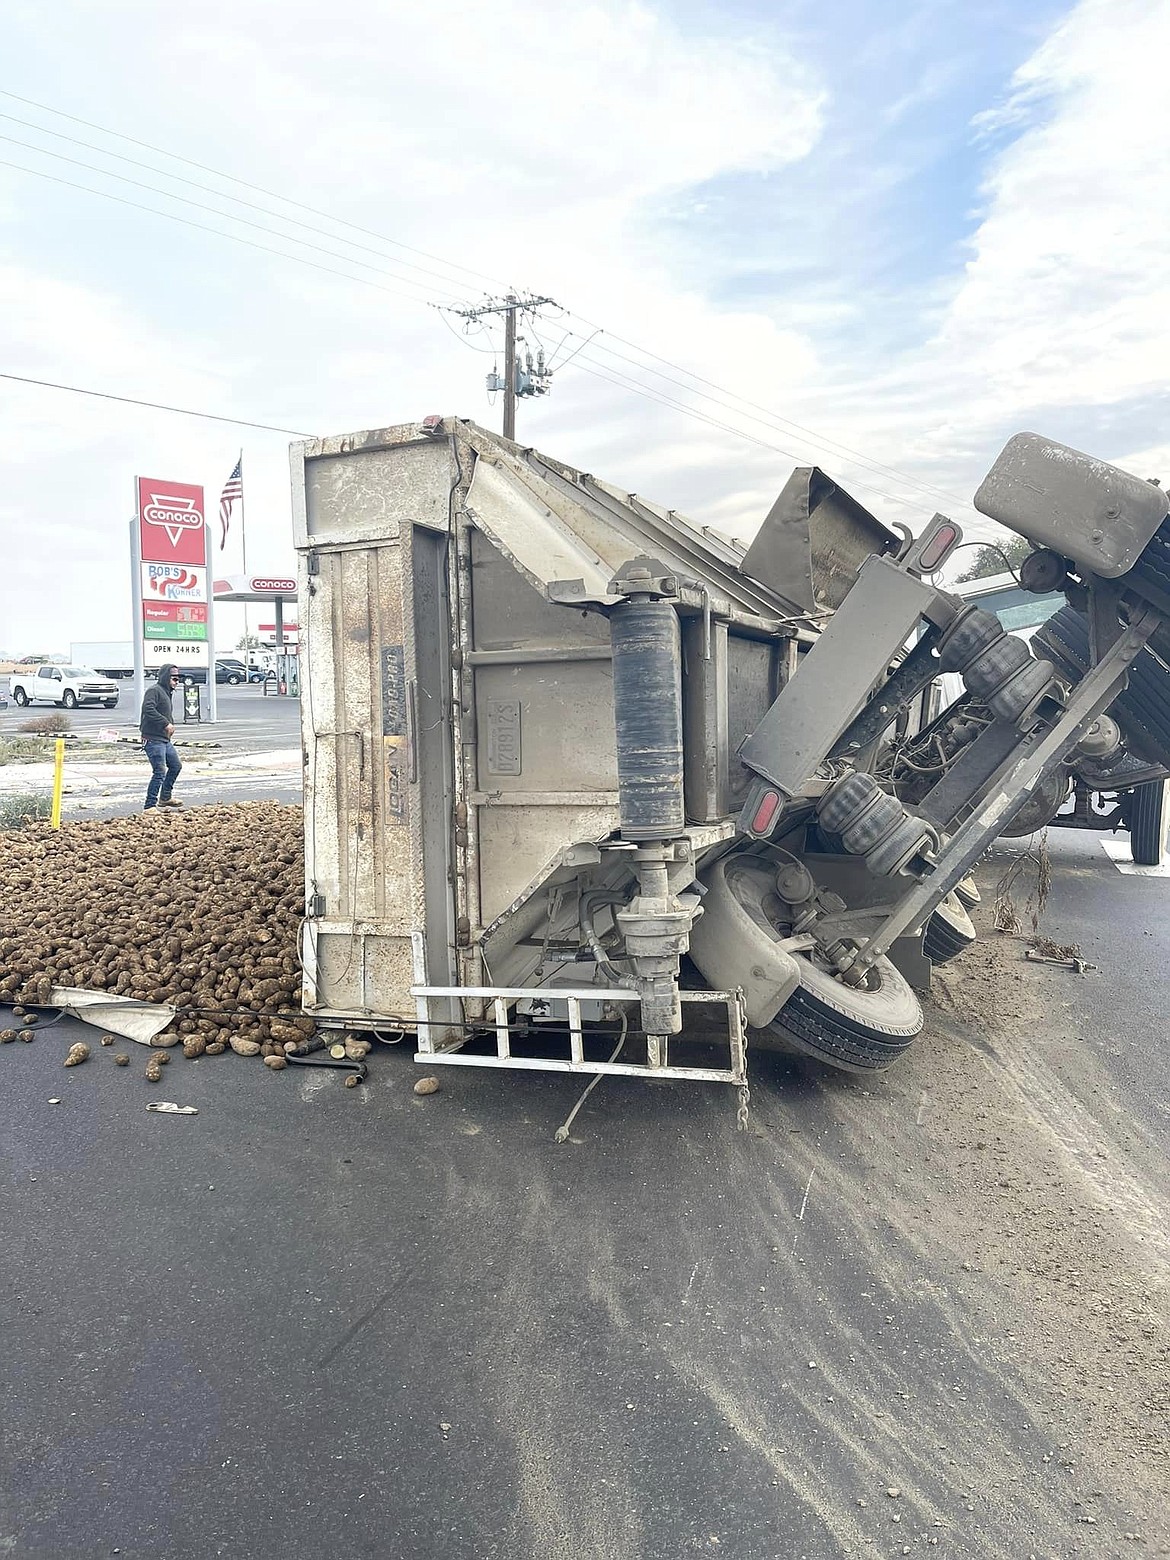 The intersection of S.R. 24 and Bench Road south of Othello was blocked for roughly two hours on Thursday after a potato truck partially overturned, spilling potatoes across the road.